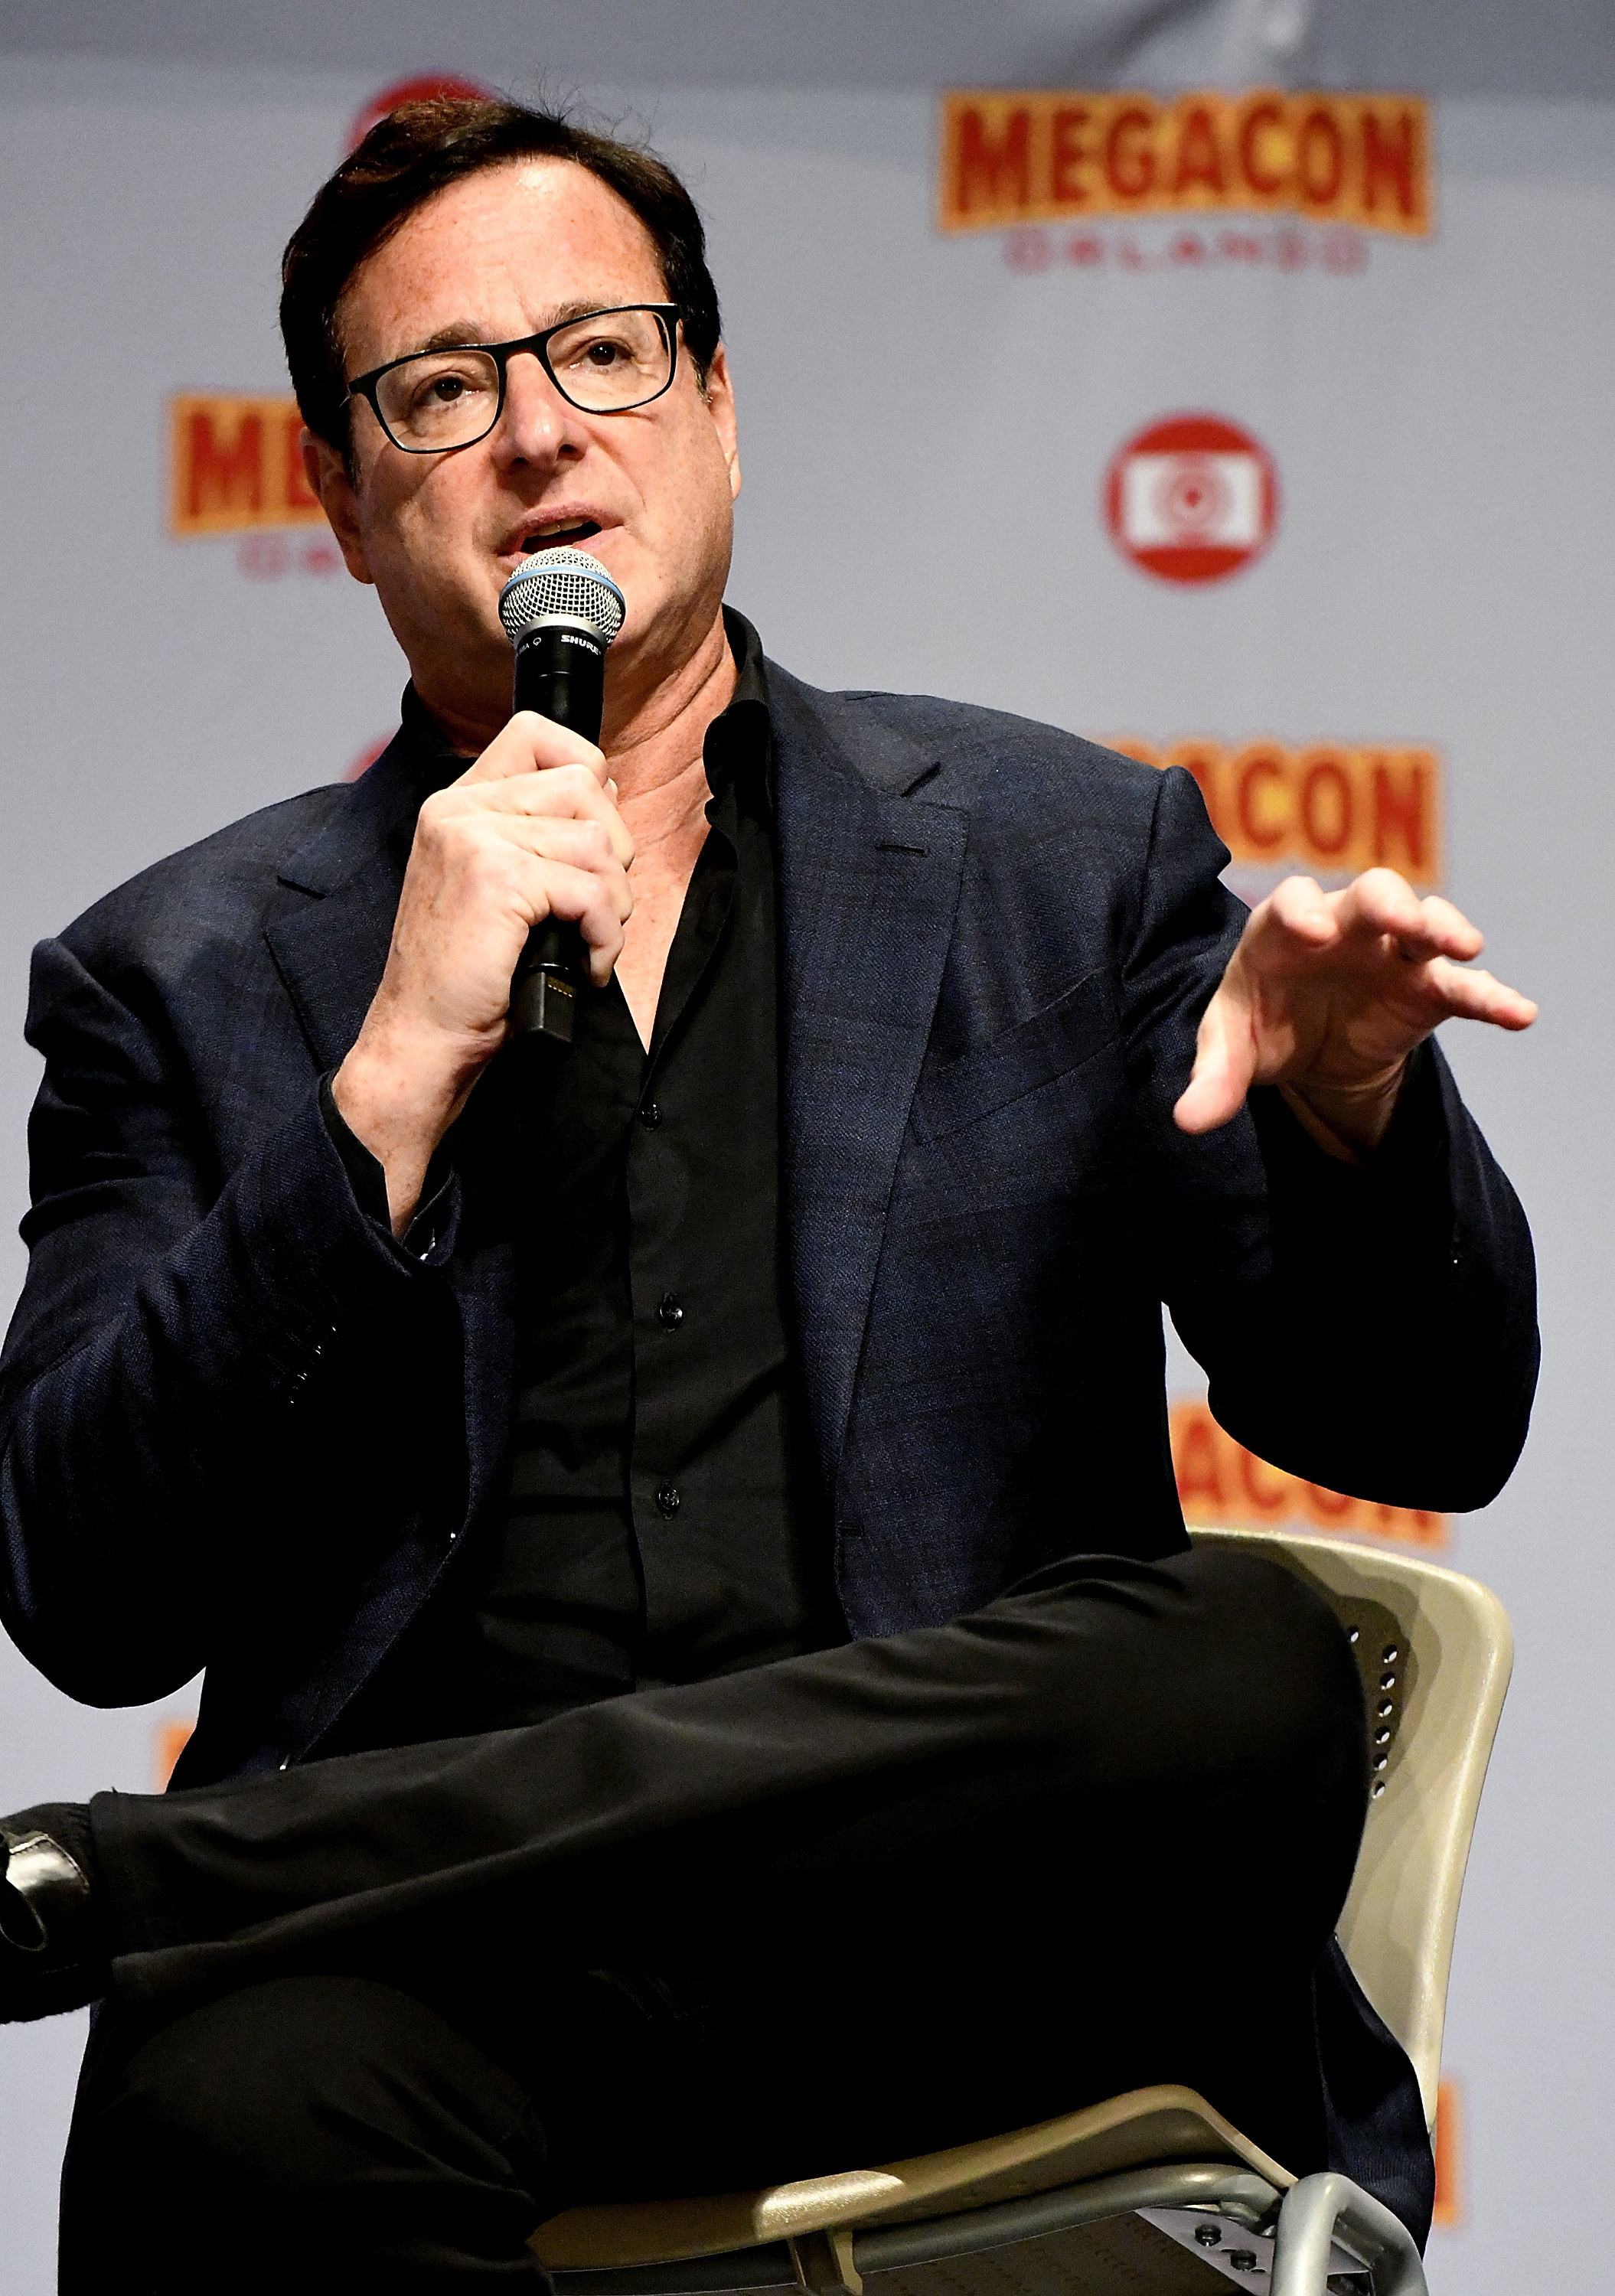 Saget extends his arm while speaking into a microphone